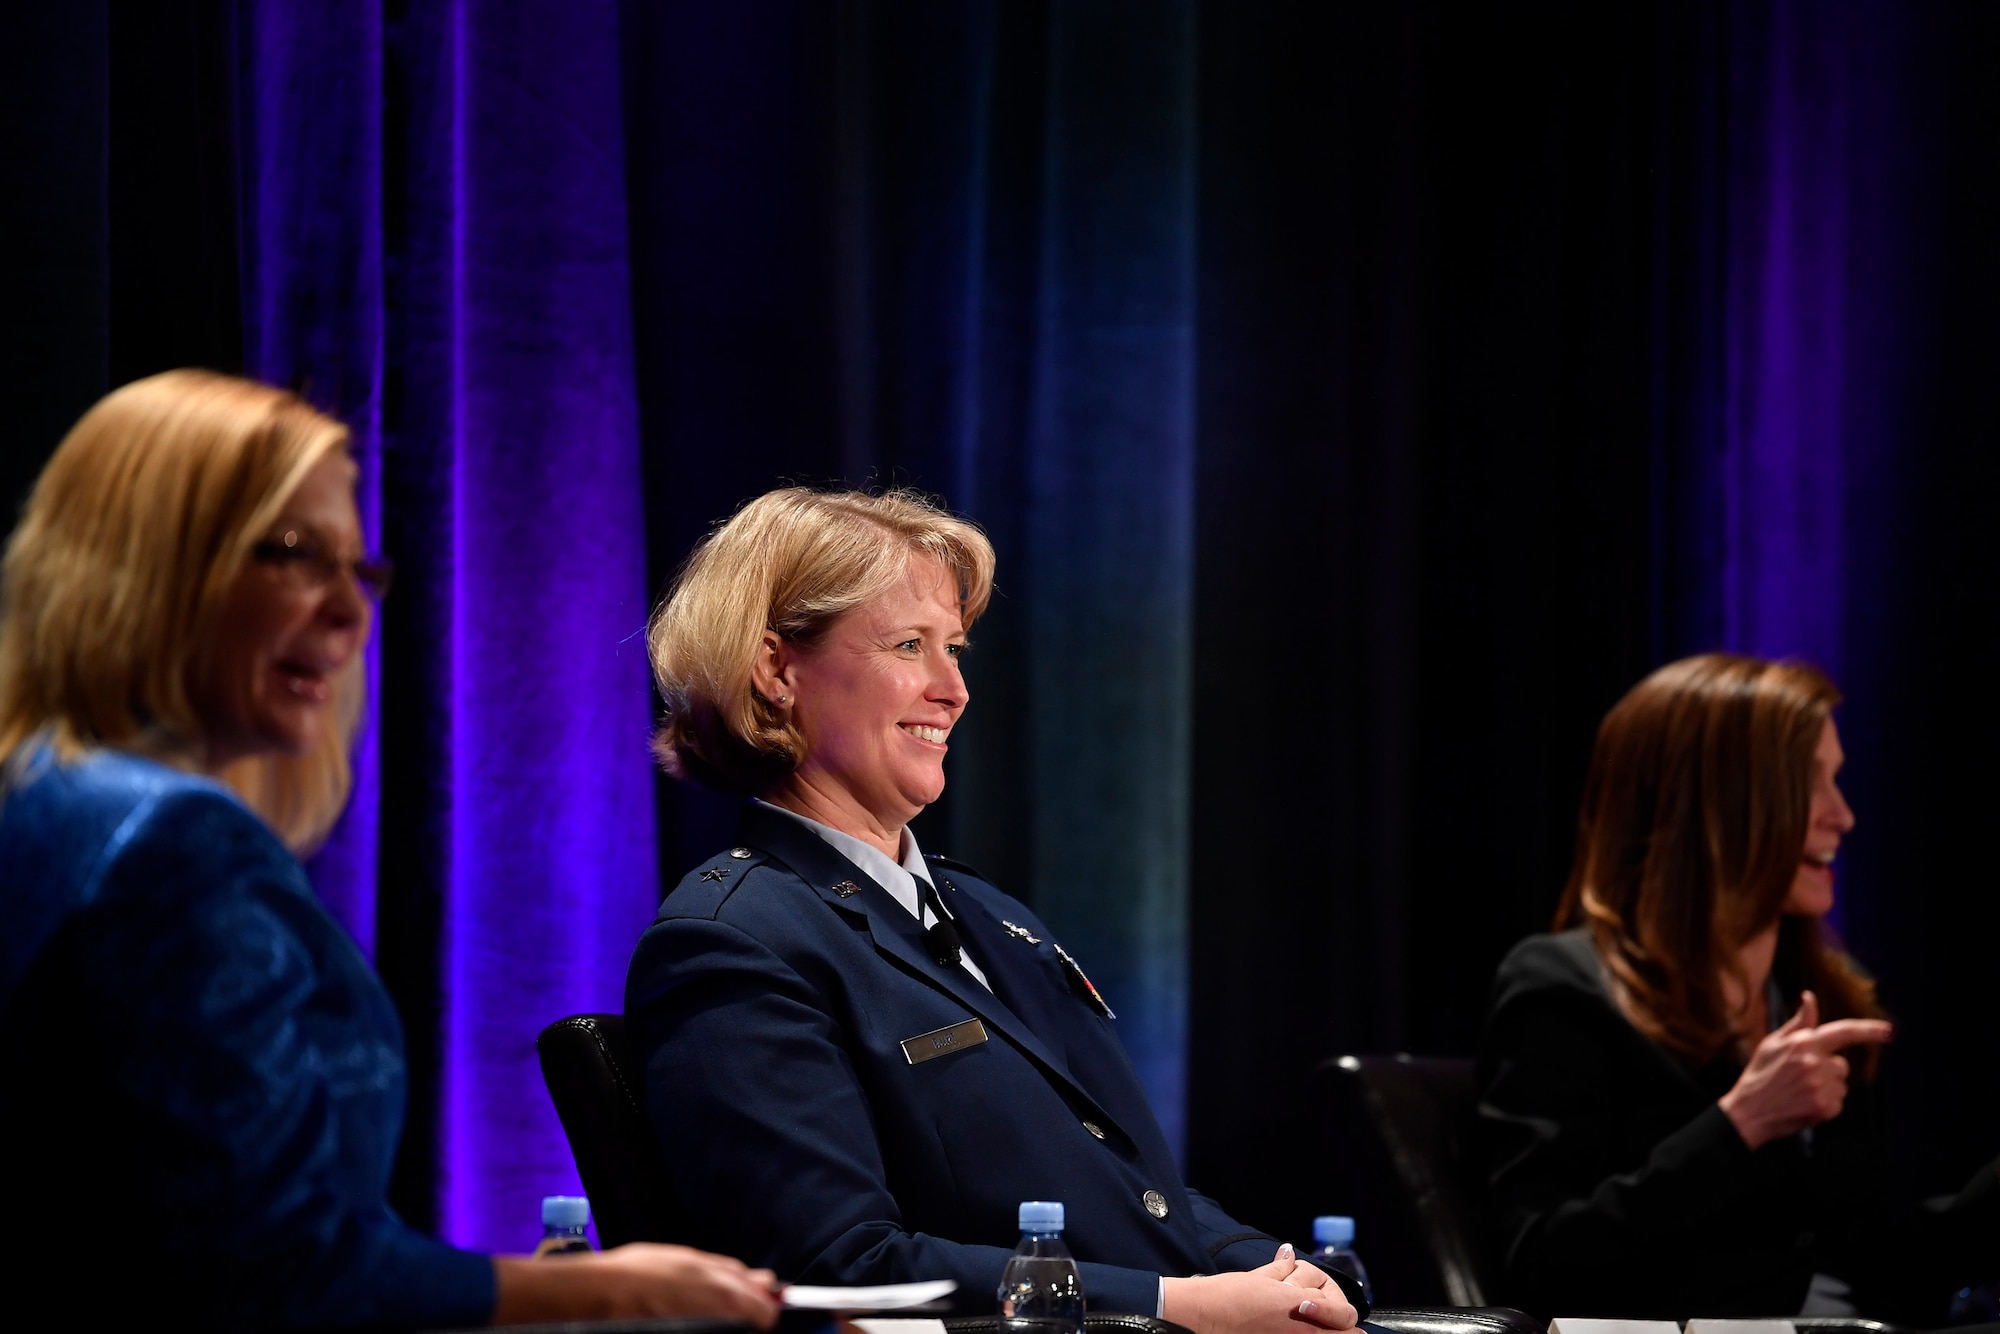 Brig. Gen. Deanna Burt, Director of Operations and Communications, Air Force Space Command, participates in a panel at the third Women’s Global Gathering to discuss her struggles and successes navigating a career in which she was frequently the only woman in the room, Colorado Springs, Colorado, April 11, 2019.